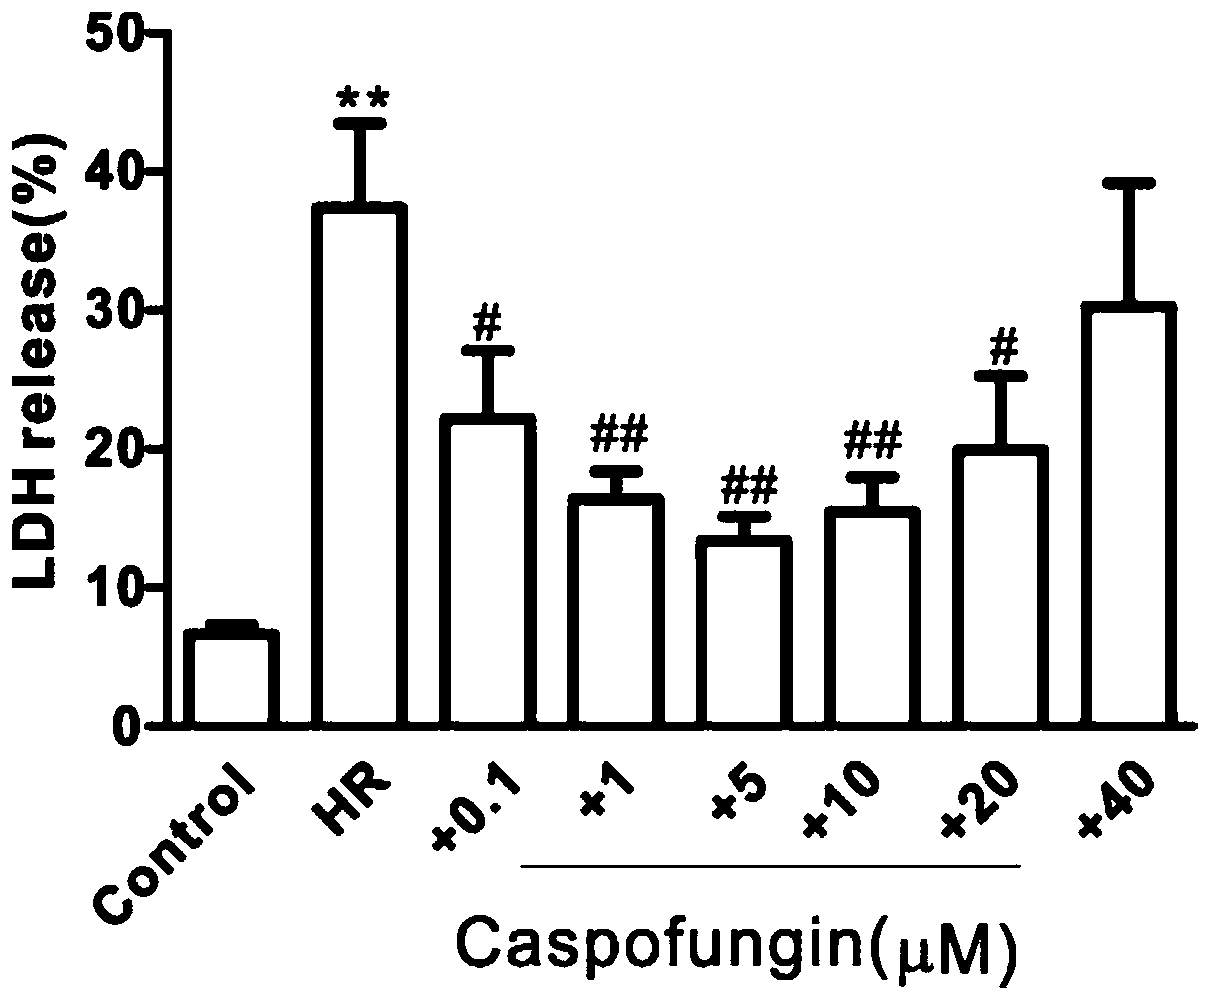 Application of caspofungin in preparation of medicine for treating ischemia/reperfusion injury